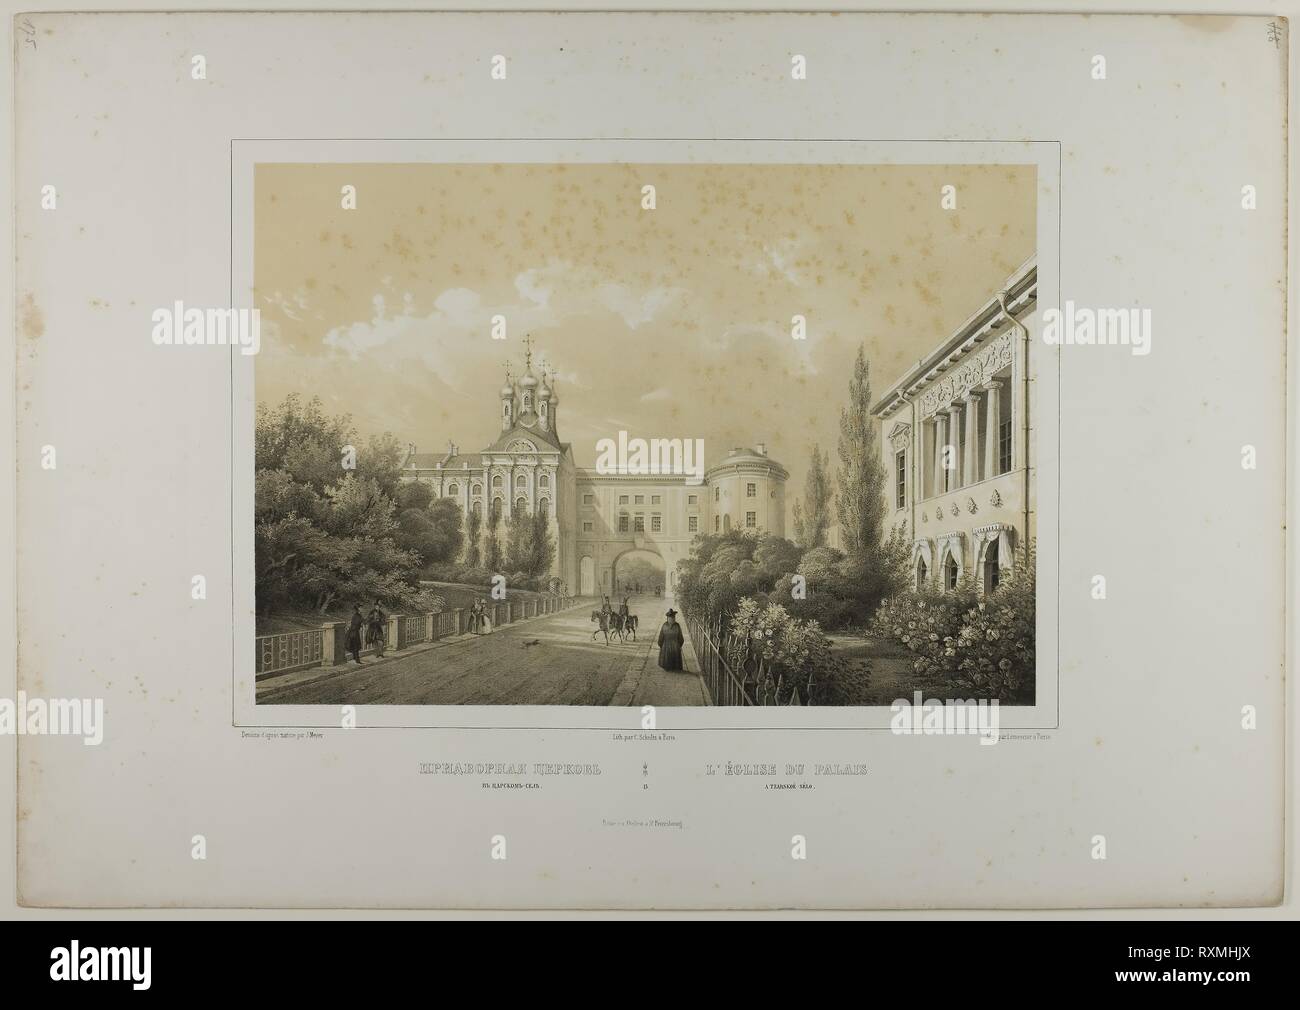 The Church at the Tsarskoé-Sélo Palace. C. Schultz (possibly German,  active. c. 1820-1830); after J. Meyer. Date: 1815-1825. Dimensions: 242 ×  349 mm (image); 399 × 569 mm (sheet). Lithograph in black